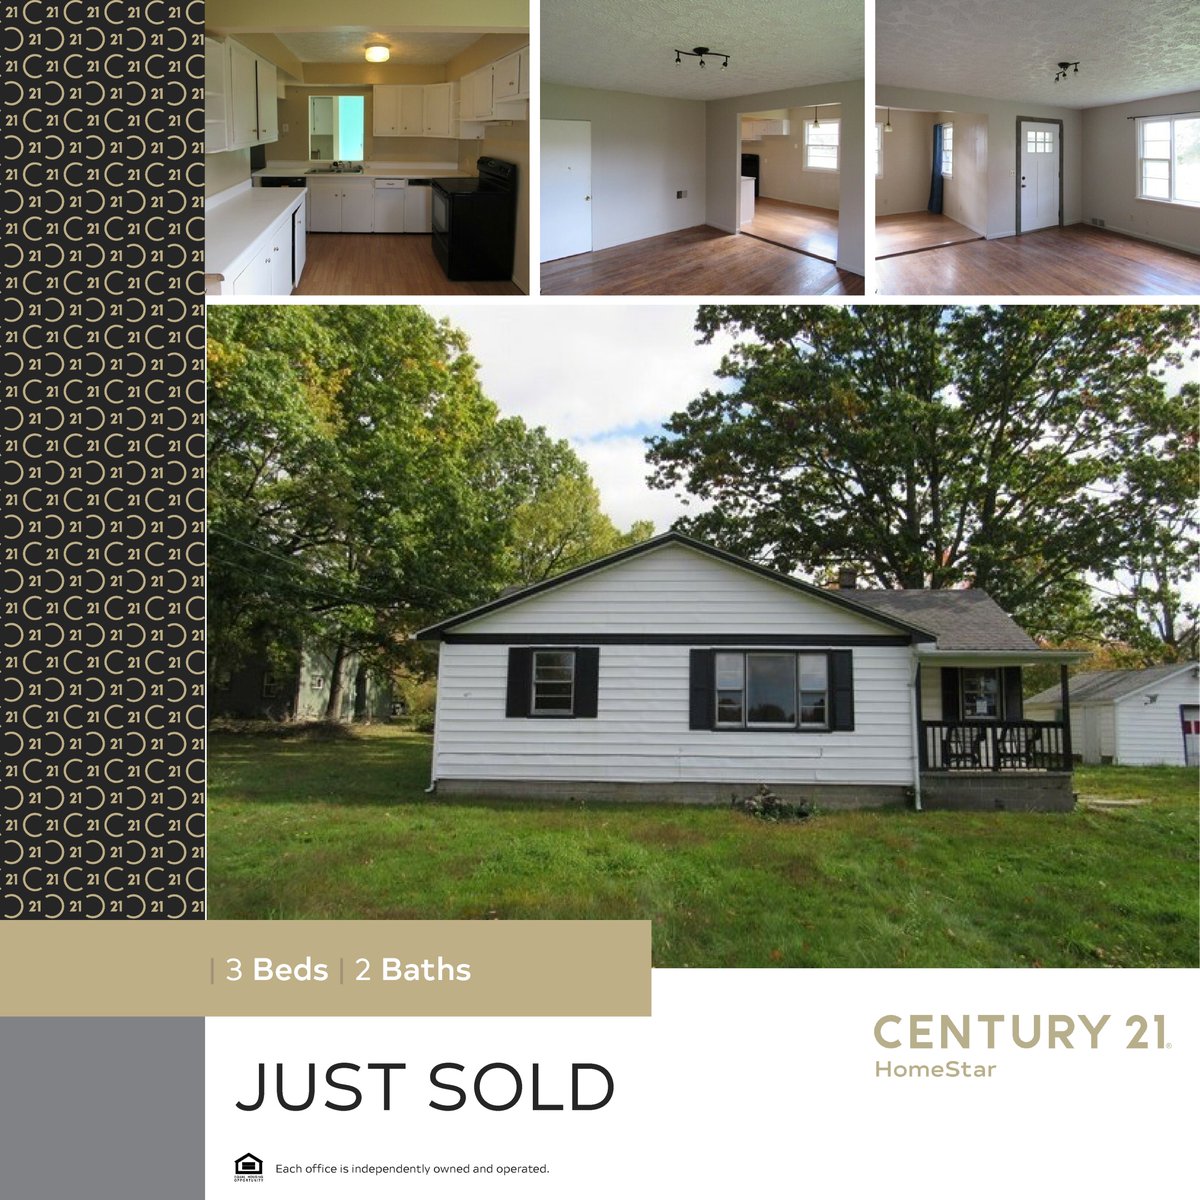 Just sold this home I had listed.  It had an Aurora address but Crestwood Schools.  I was the 2nd agent in to be able to sell this investment property.  I can help you too!

#justsold #homesold #sellersagent #listingagent #realesateagent #letusbringyouhome